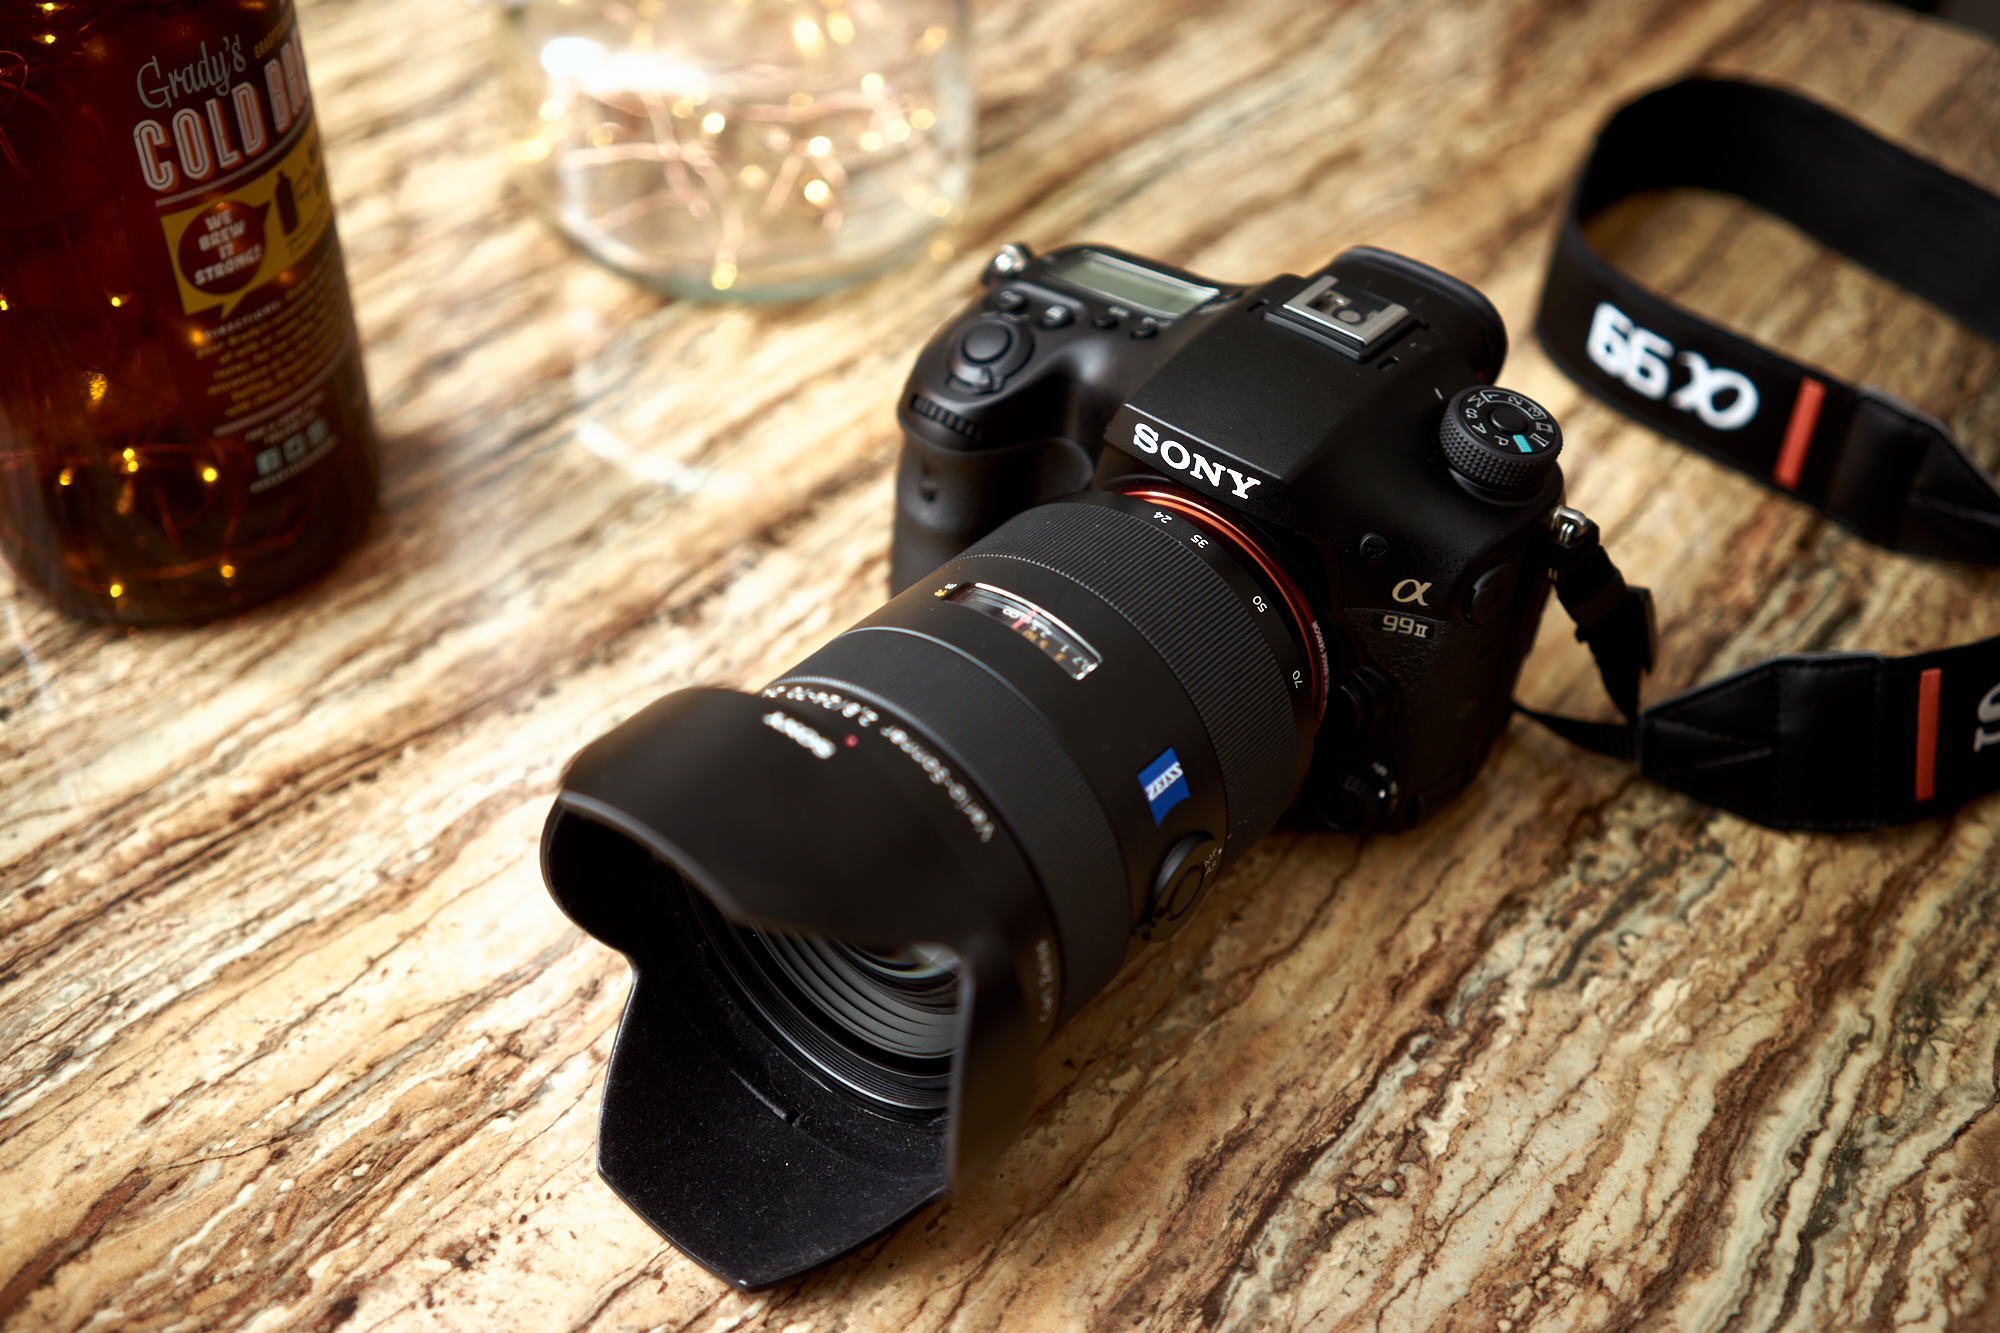 Chris Gampat The Phoblographer Sony a99 II review product images 35mm, f2.8, ISO 100, 1-100s,35,SONYILCE-7, Zeiss Sonnar T* FE 35 mm F2.8 ZA (SEL35F28Z)